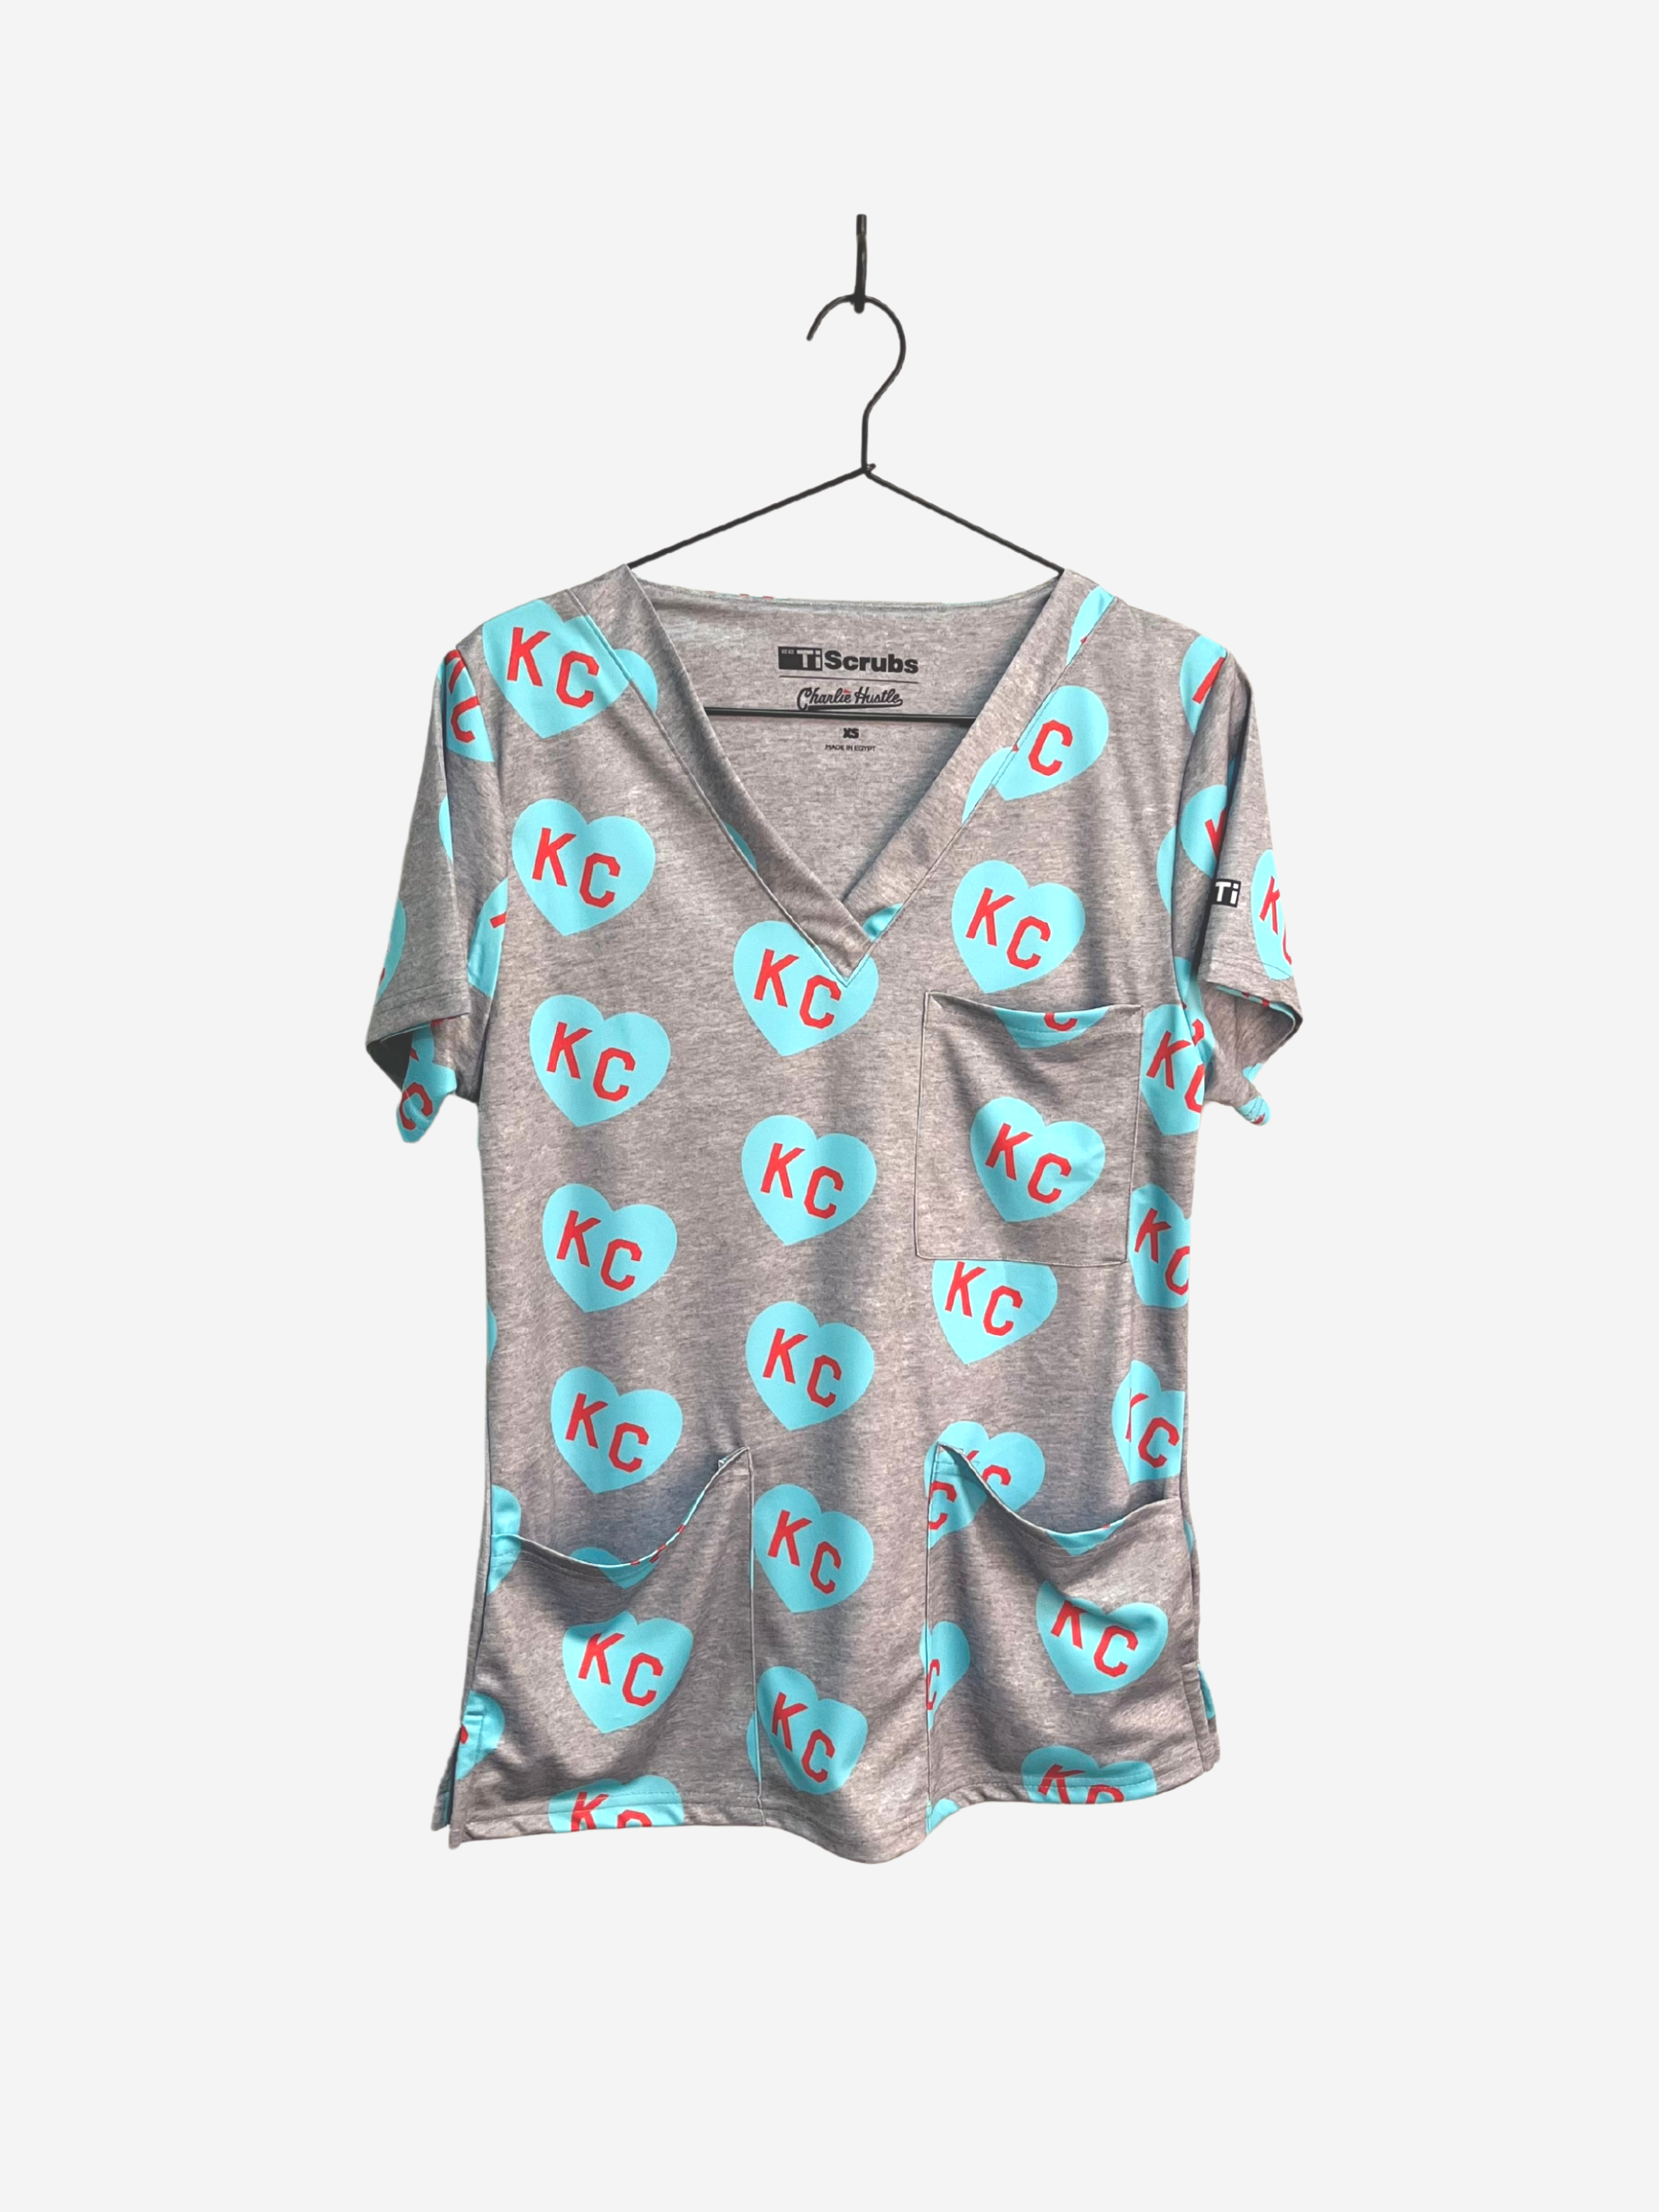 Women's Charlie Hustle Print Scrub Top in Turquoise and Red with 3 Pockets